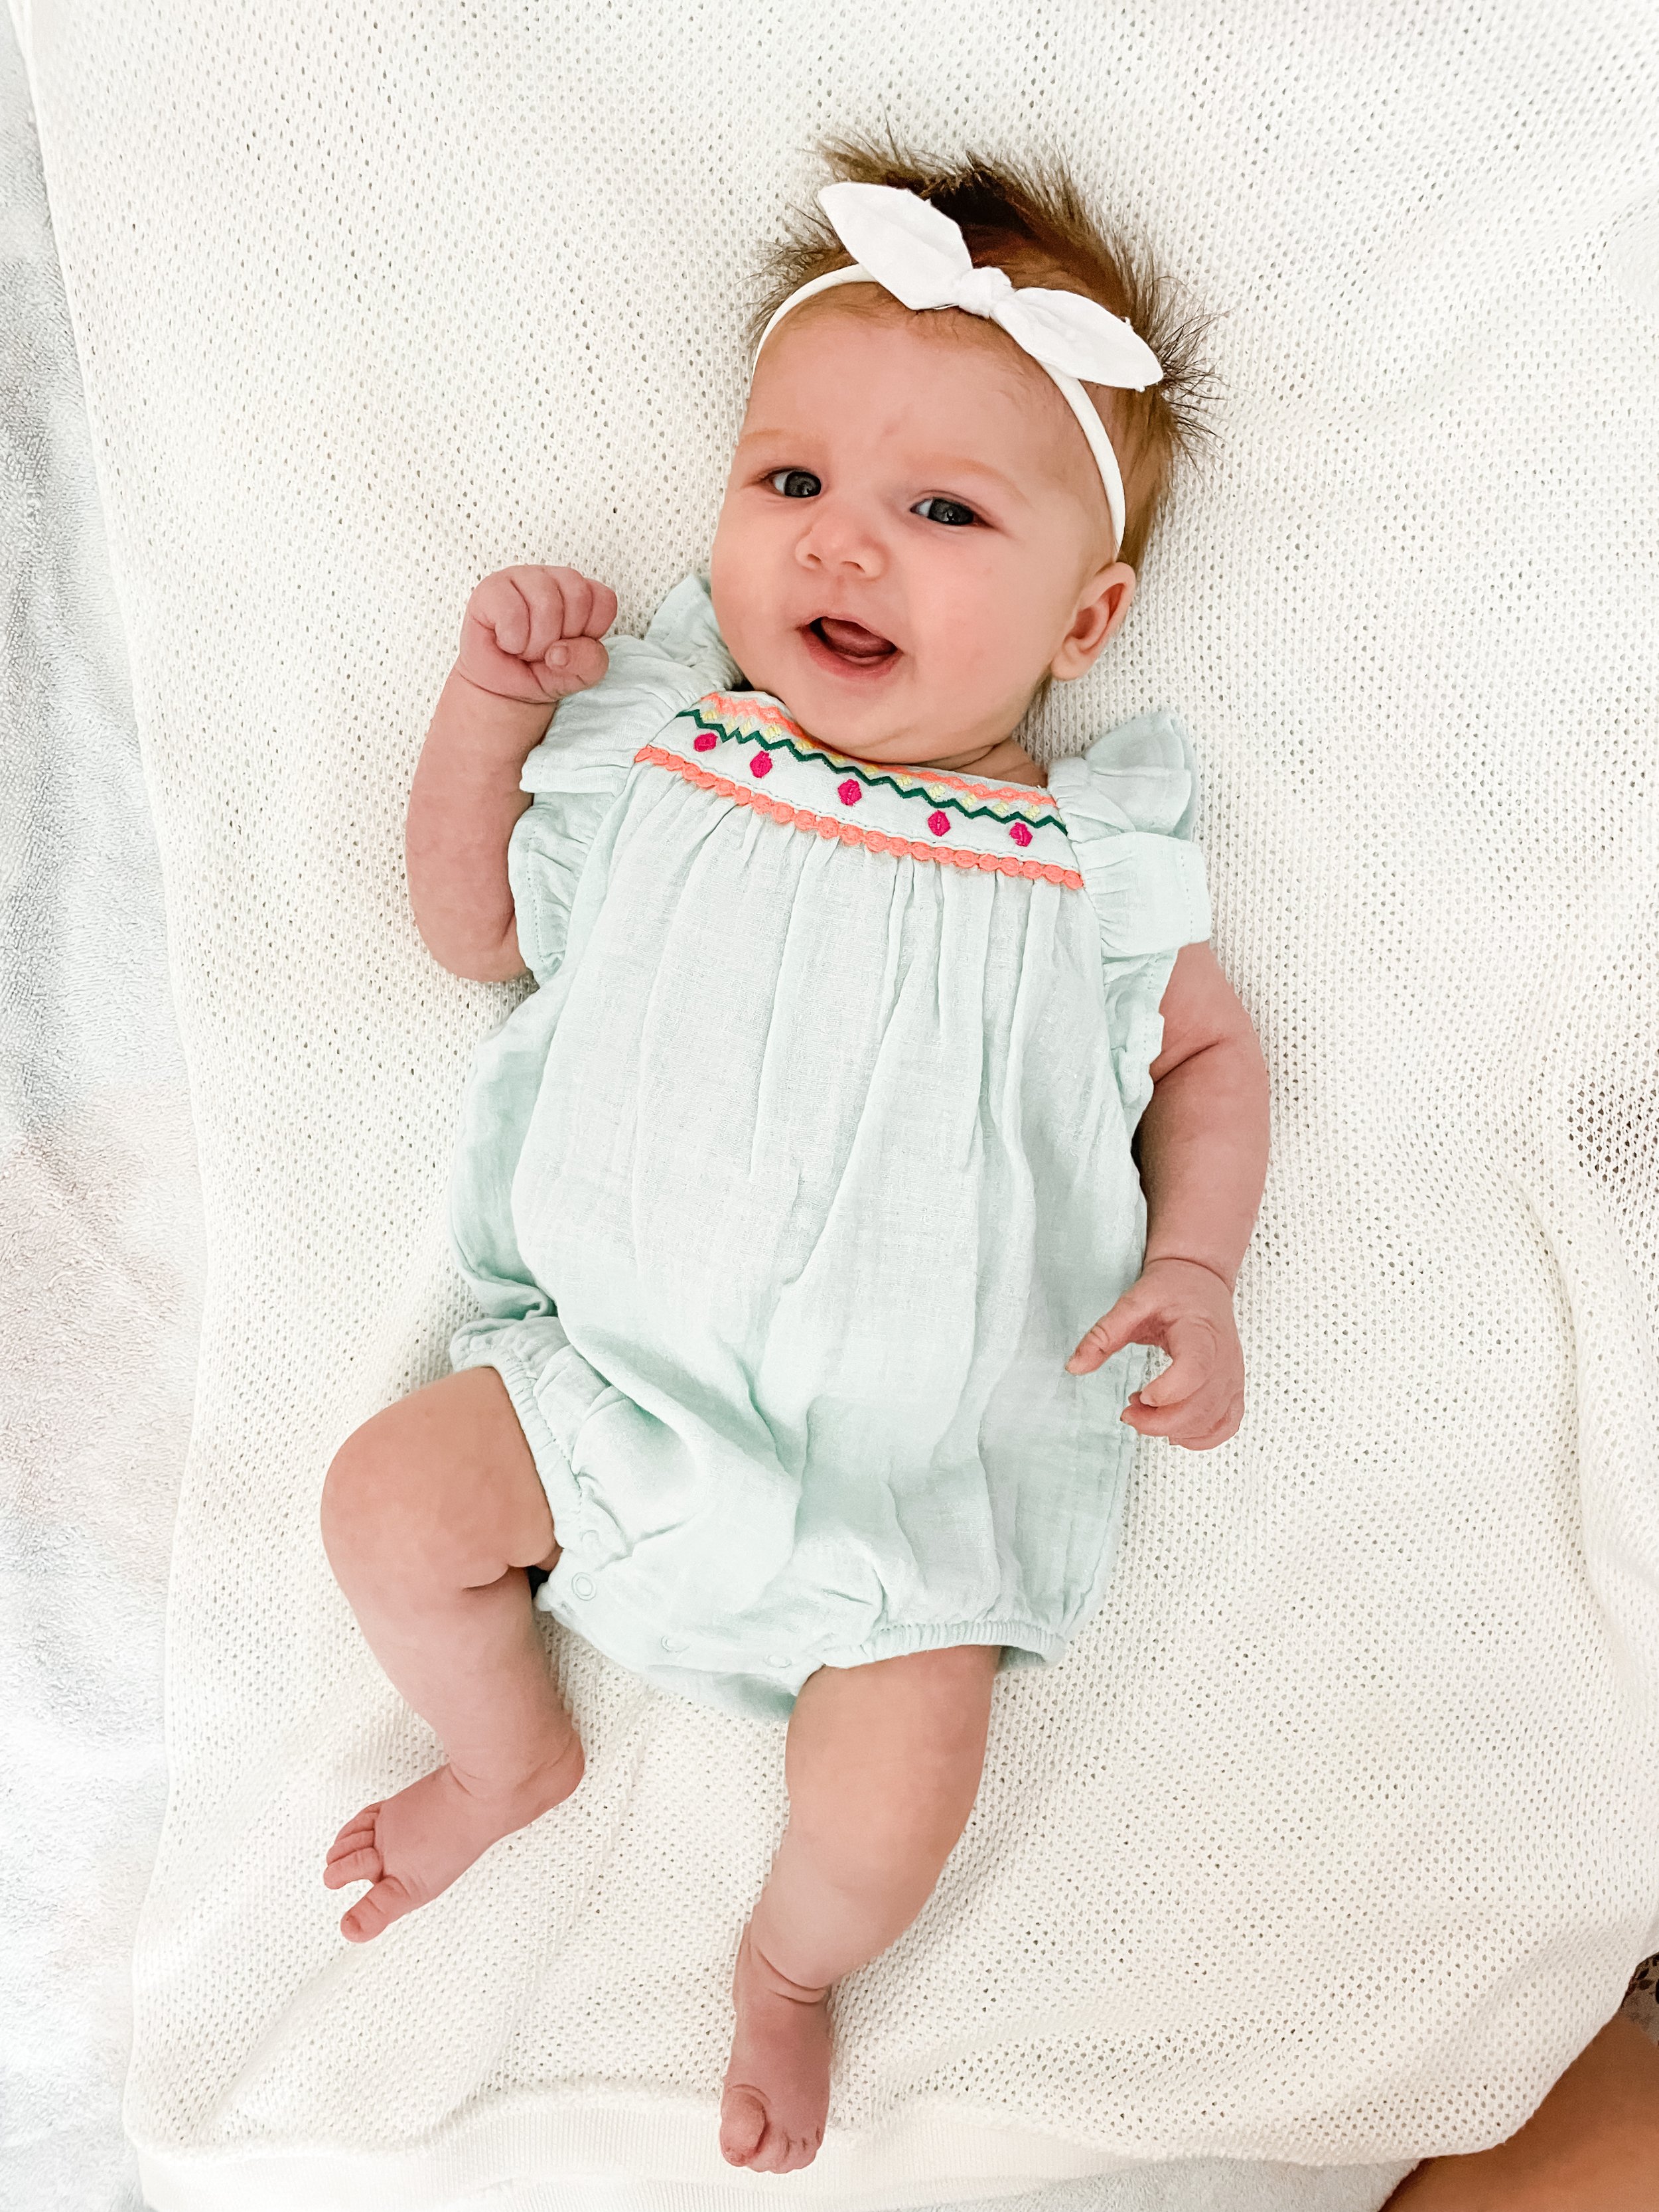 Baby Style: Cute Outfits for Summer!